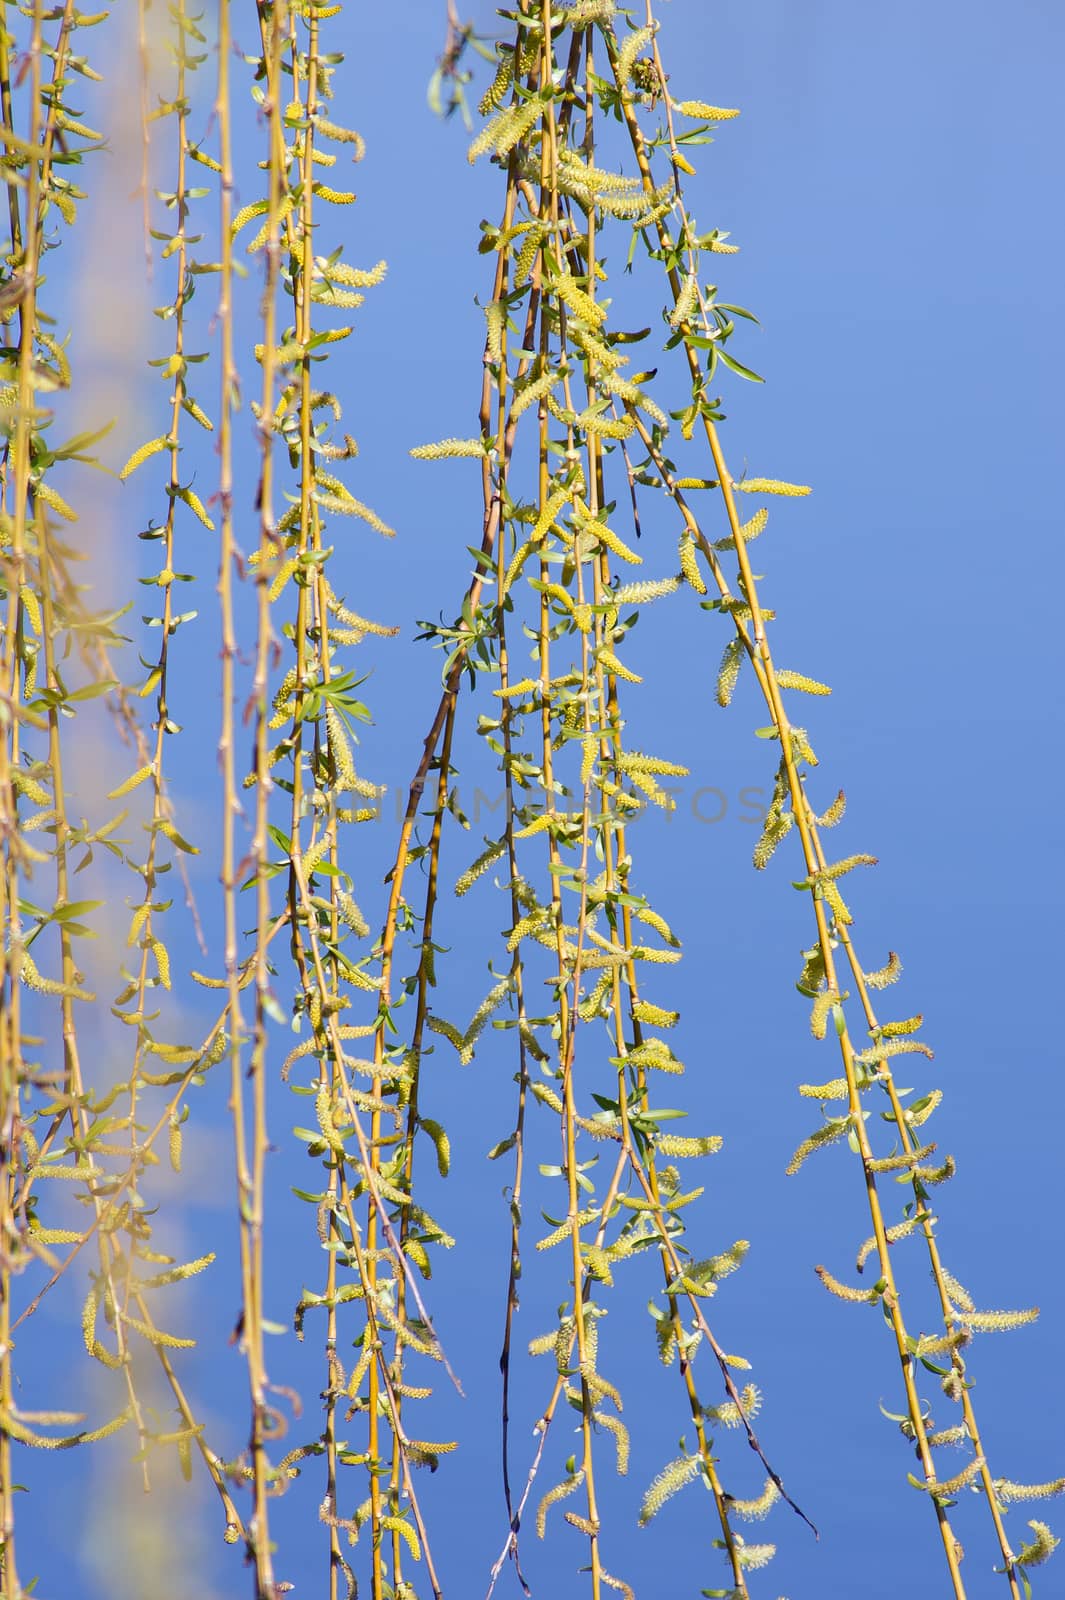 Weeping willow (Salix sepulcralis) suitable for healing as well.